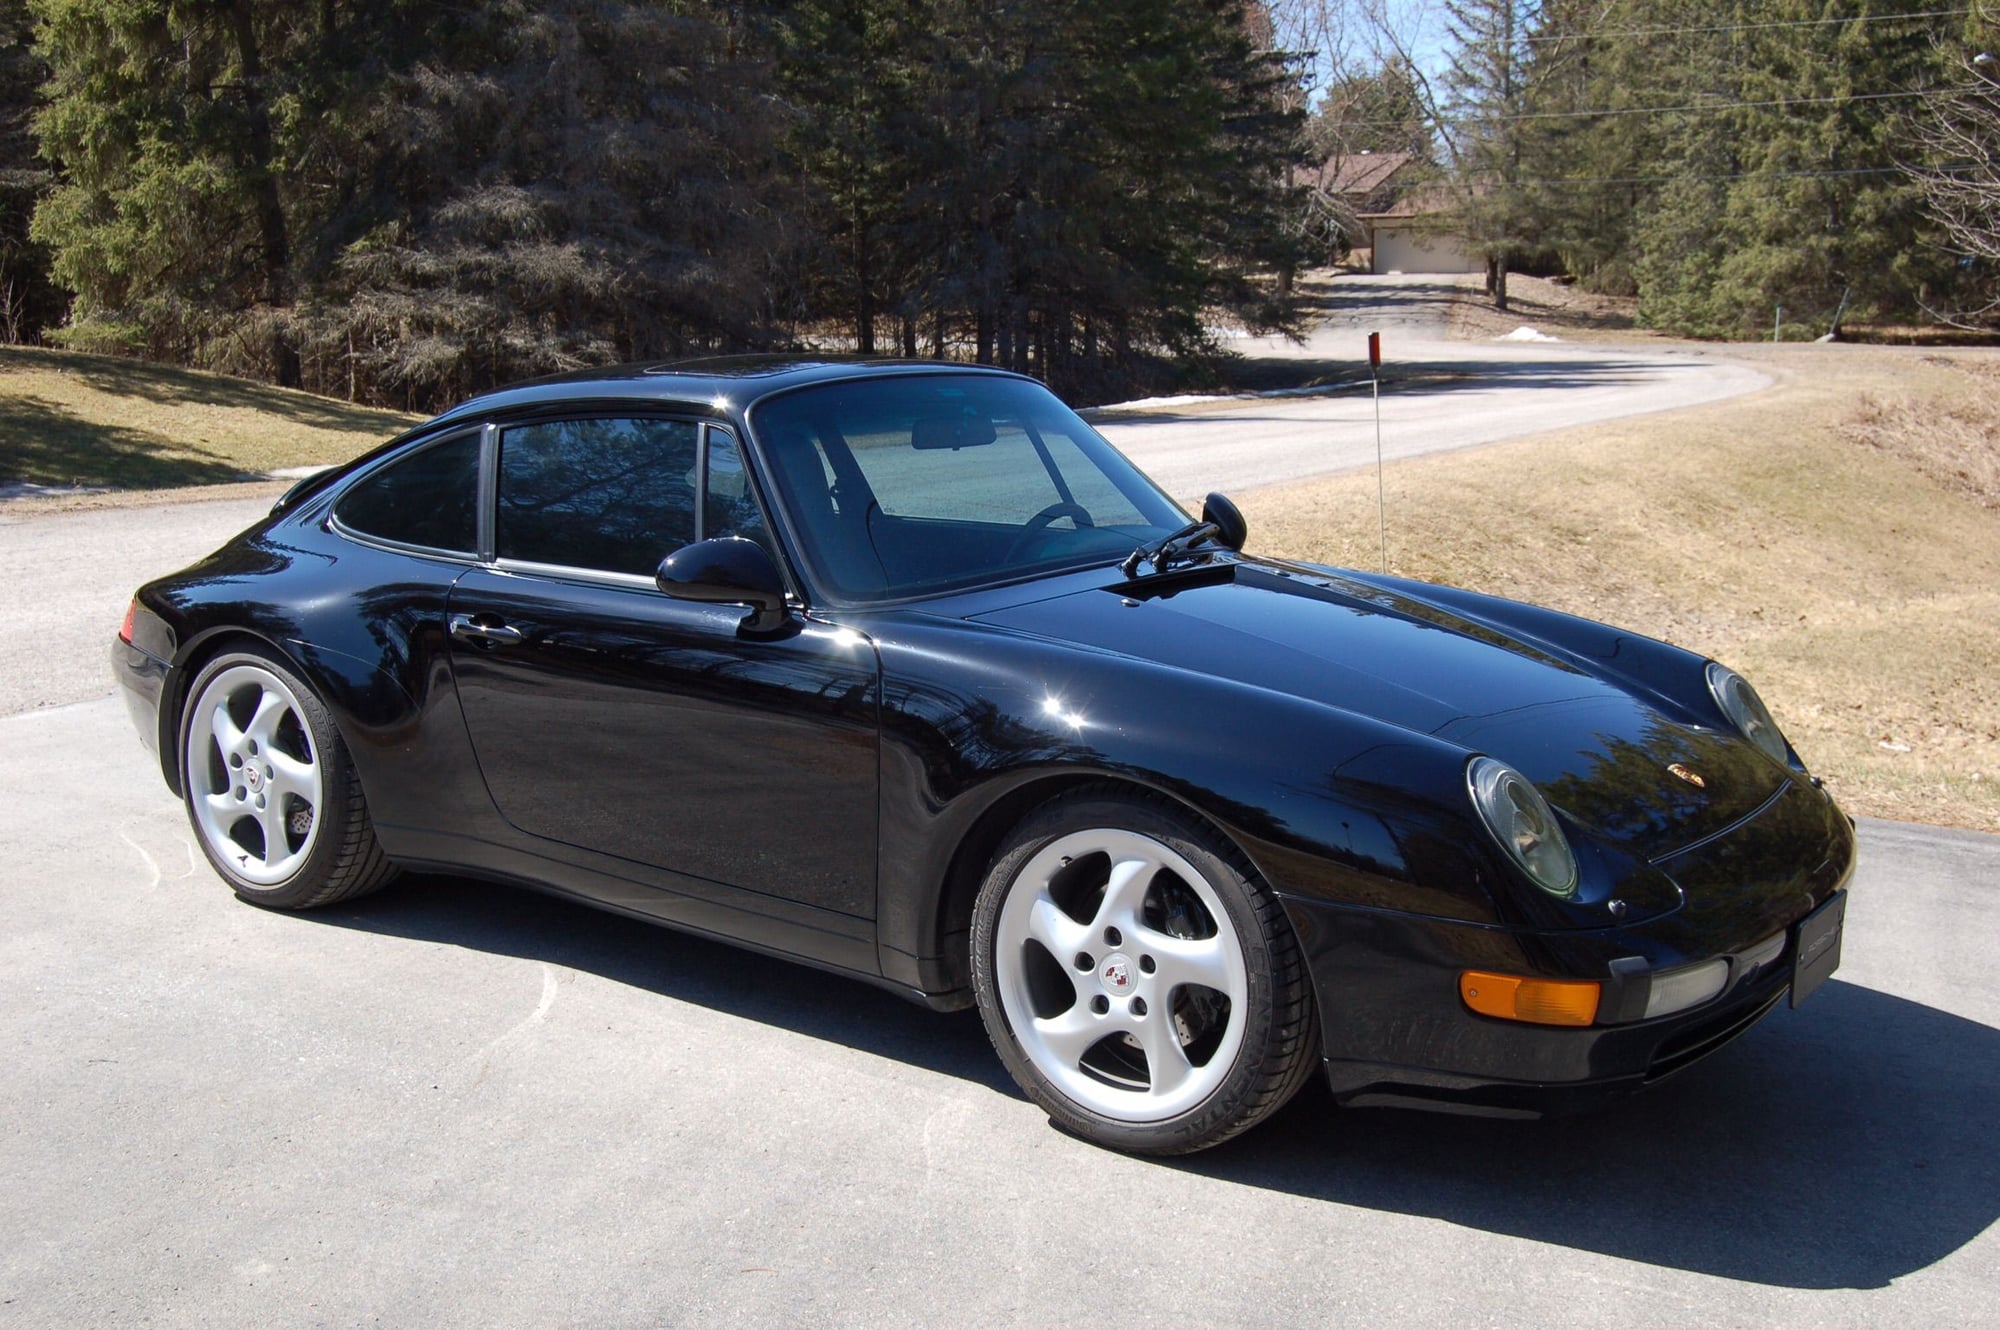 1995 Porsche 911 - 1995 Porsche Carrera 911 ( 993 C2 ) - Used - VIN WP00AA2997SS32063 - 2WD - Manual - Coupe - Black - Bethany, ON L0A1A0, Canada